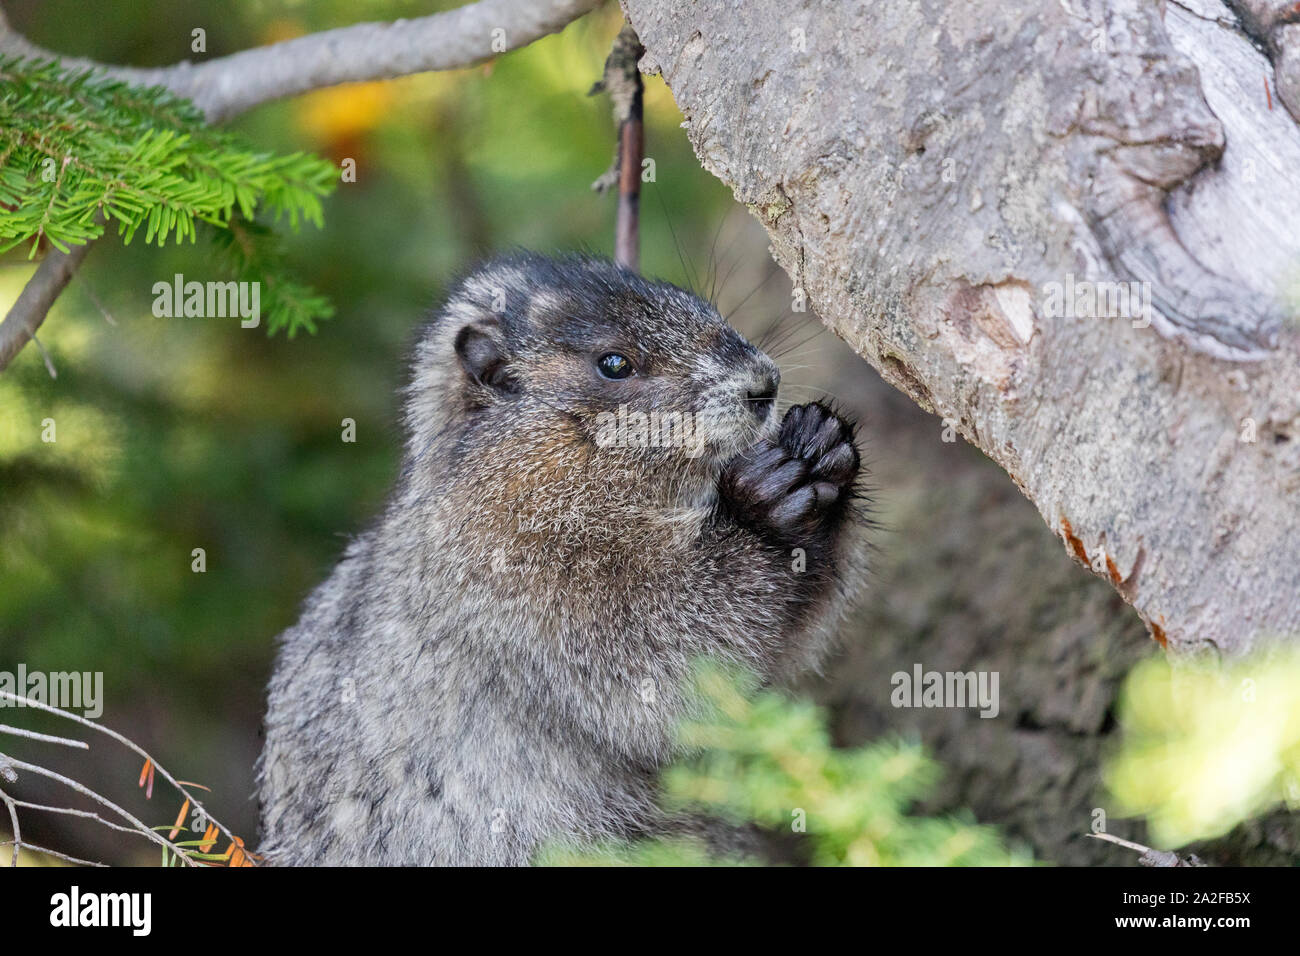 A hoary marmot nibbling on some food in the forest of Mt. Rainier National Park in Washington state Stock Photo